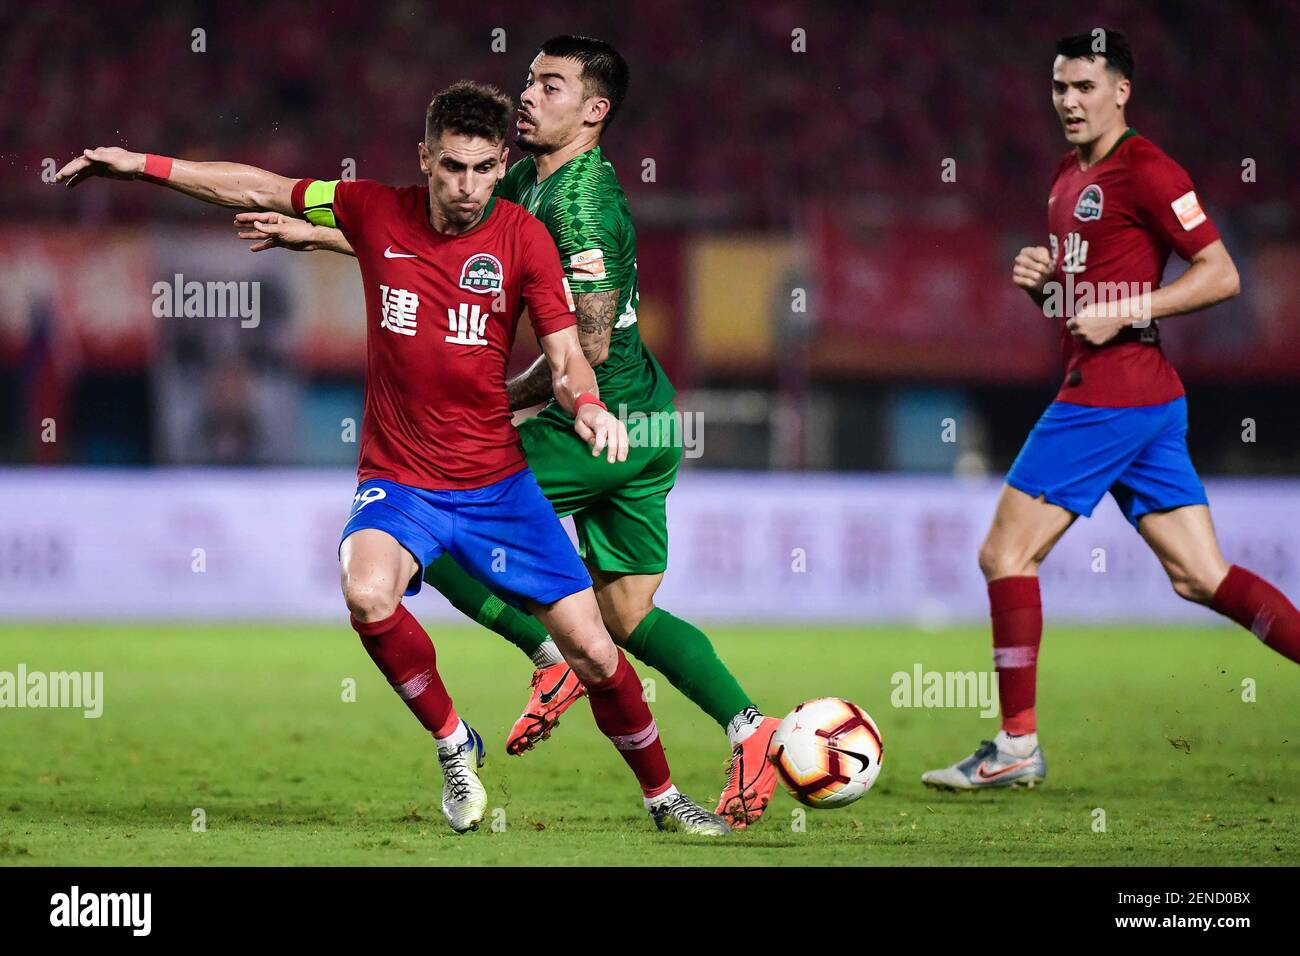 Brazilian football player Olivio da Rosa, also known as Ivo, left, of Henan Jianye passes the ball against English football player Nico Yennaris, known in China as Li Ke, of Beijing Sinobo Guoan in their 20th round match during the 2019 Chinese Football Association Super League (CSL) in Zhengzhou city, central China's Henan province, 27 July 2019. Henan Jianye defeated Beijing Sinobo Guoan 1-0. (Photo by Stringer - Imaginechina/Sipa USA) Stock Photo